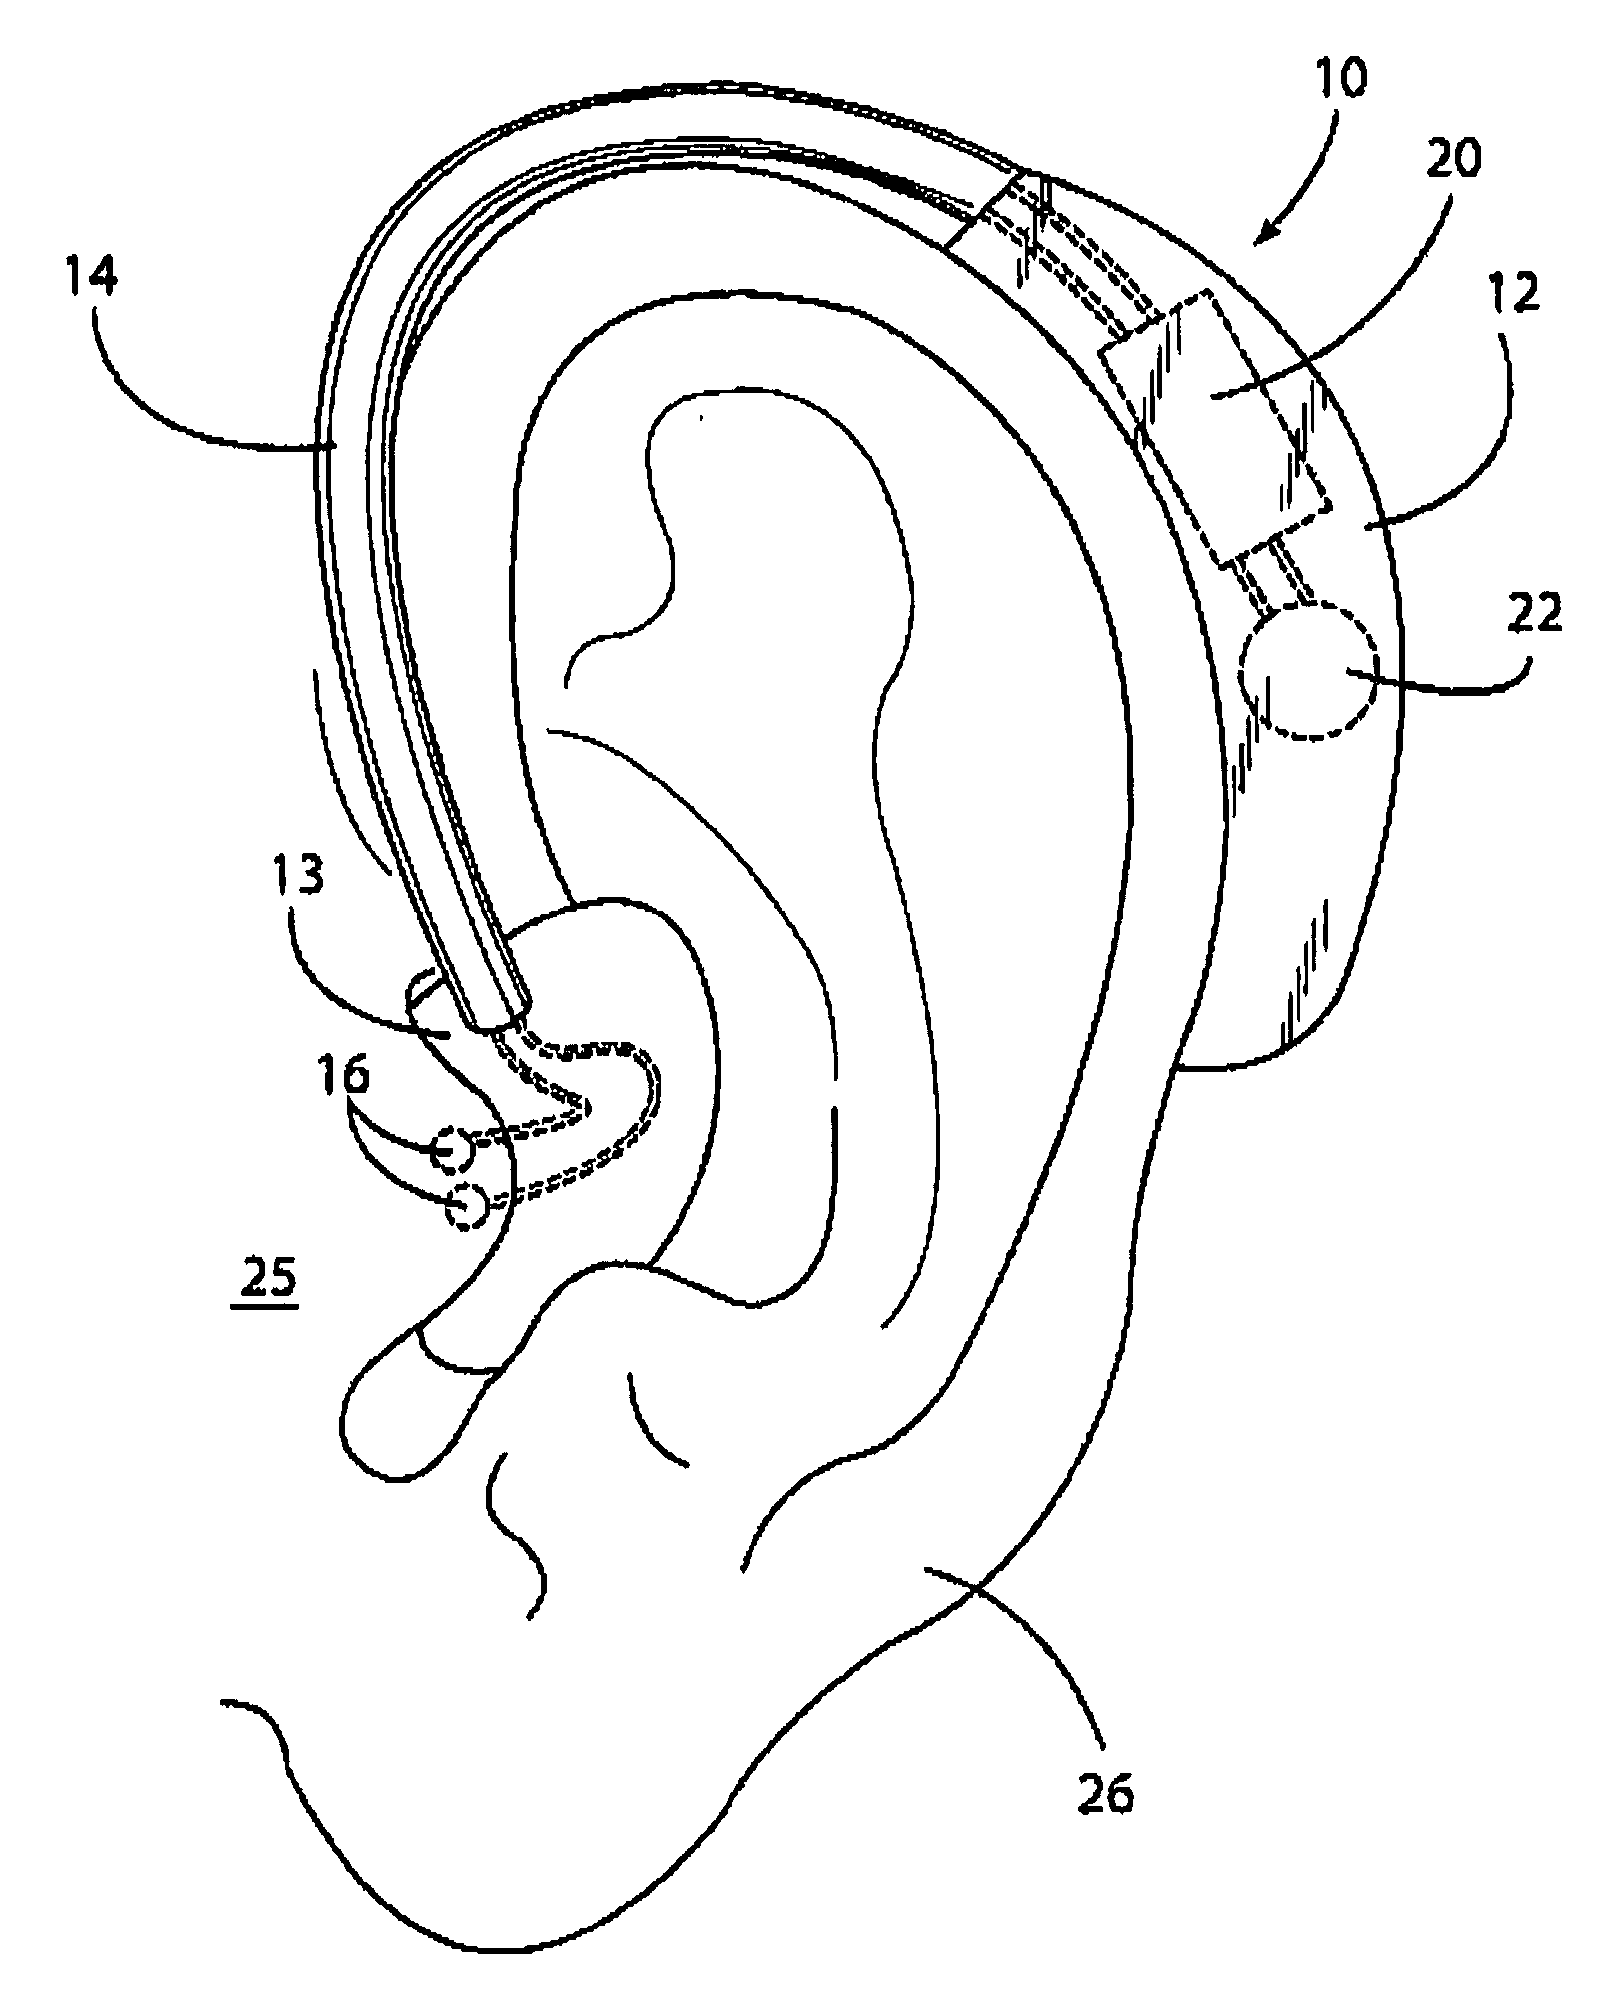 Non-invasive device and method for electrical stimulation of neural tissue